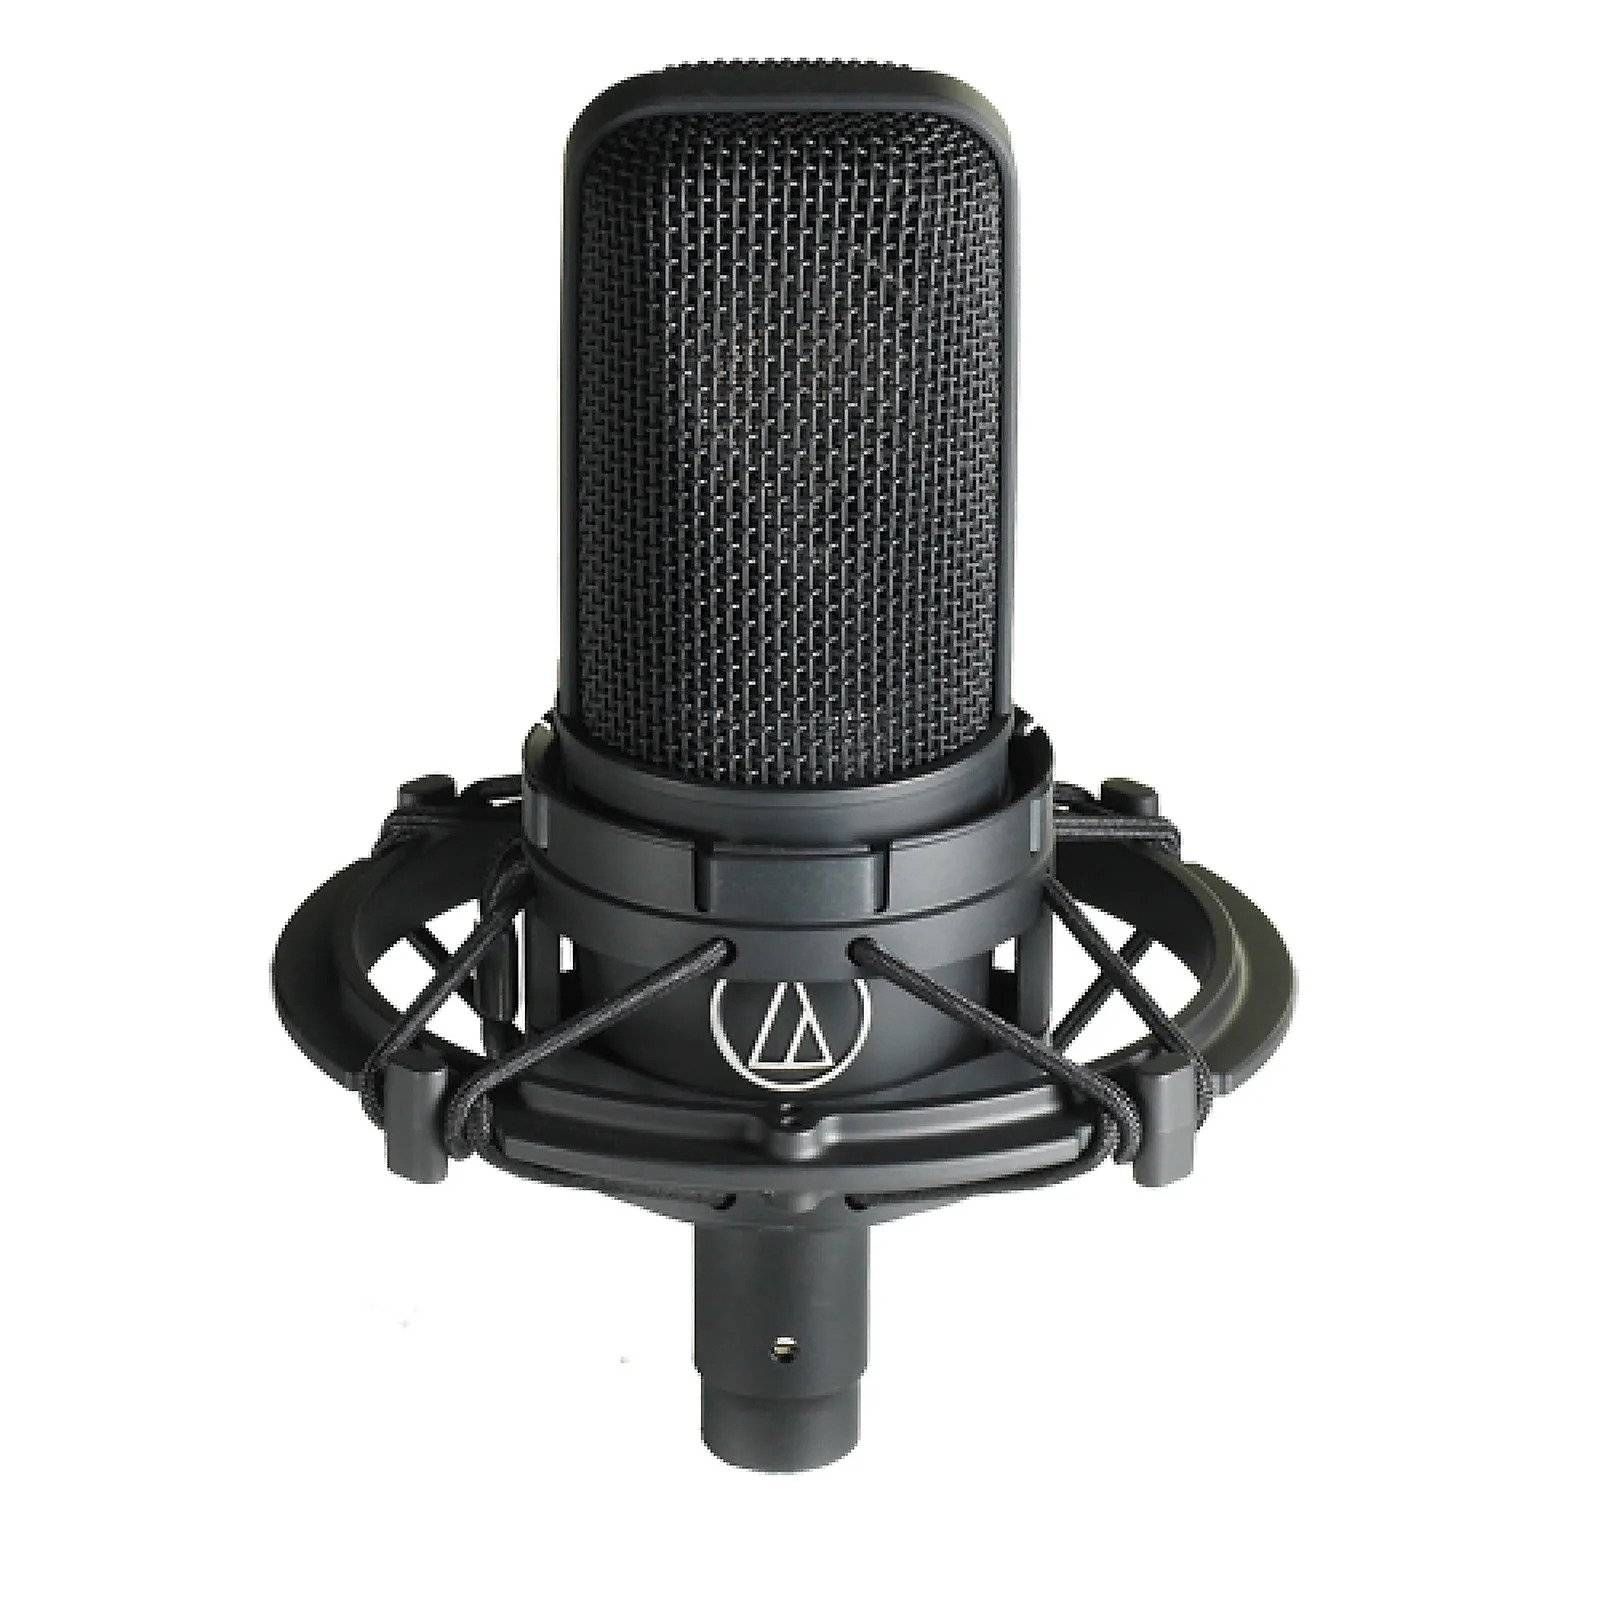 Introduction to the AT4040 Microphone